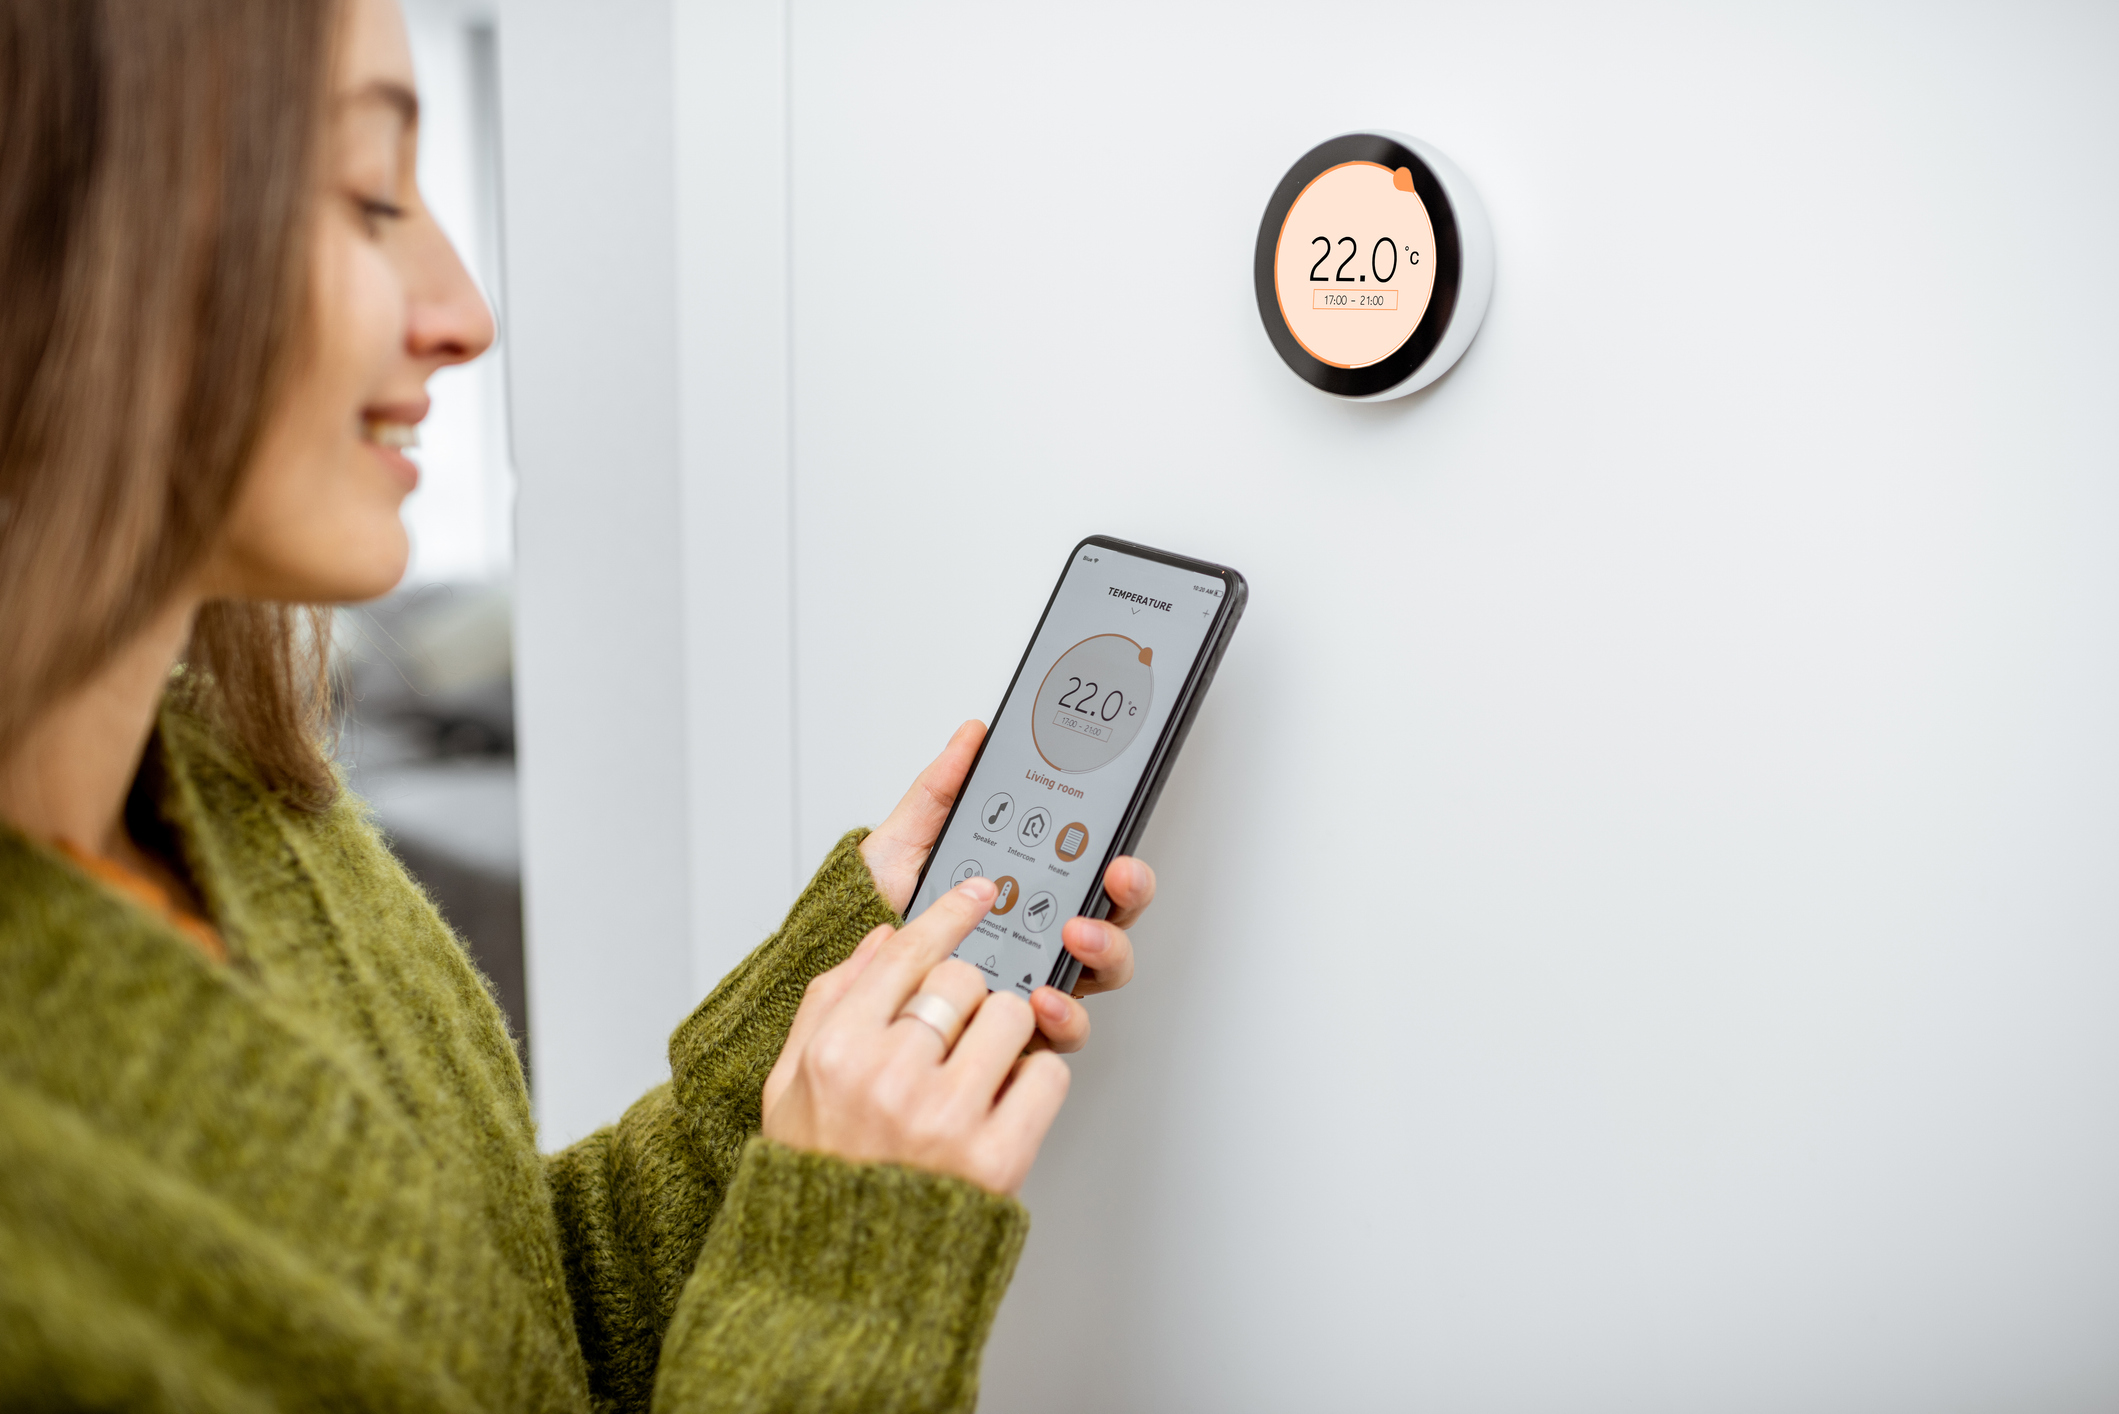 A women adjusts the temperature in her home with a smart thermostat